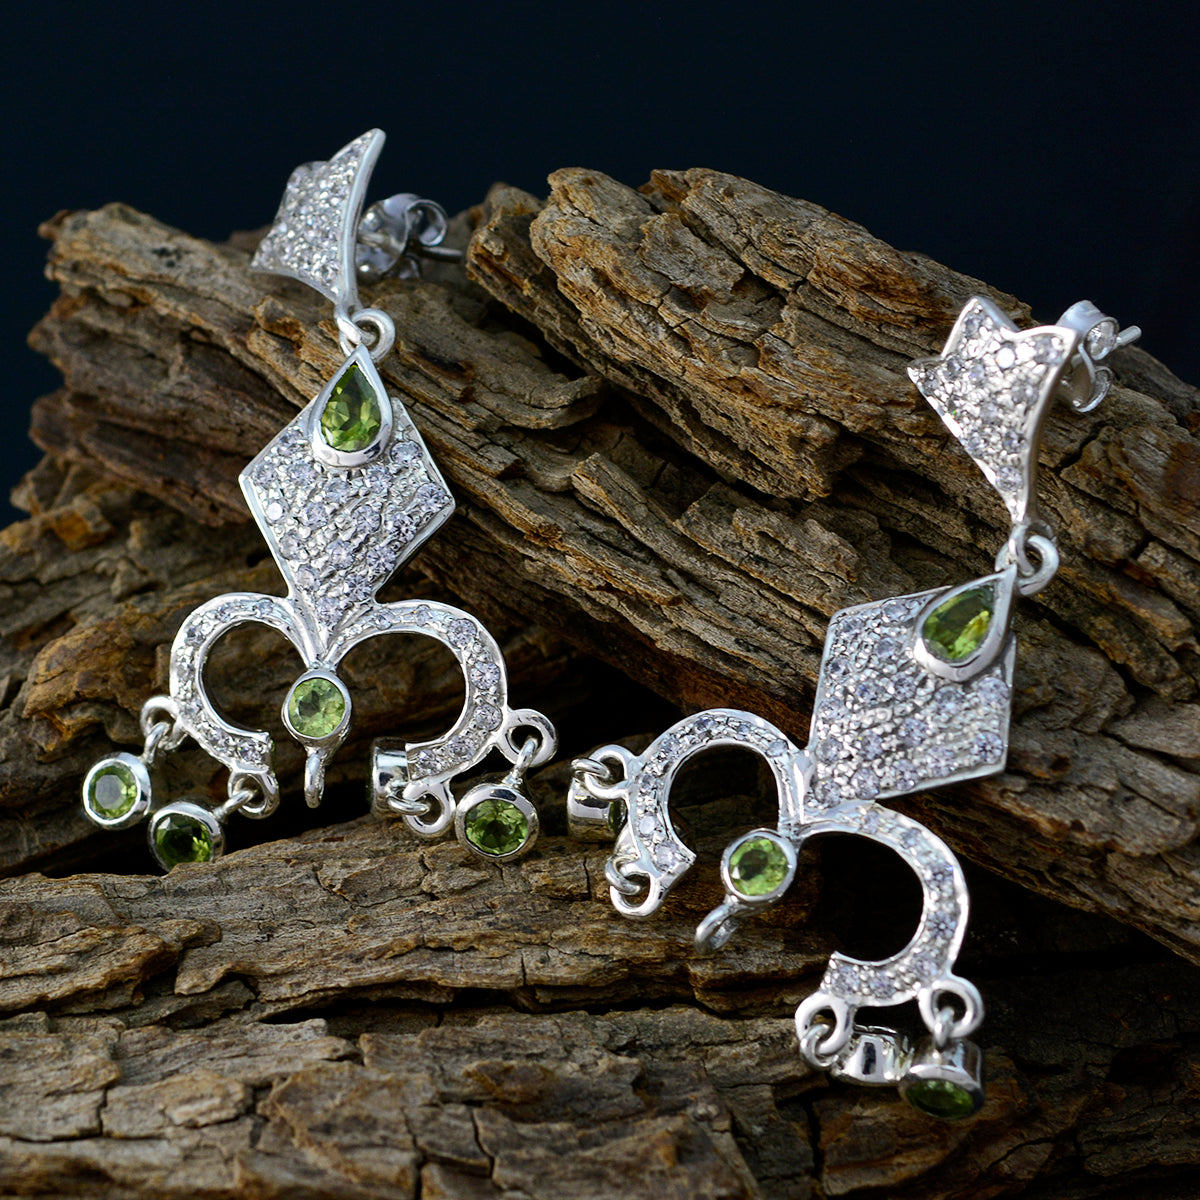 Riyo Natural Gemstone multi shape Faceted Green Peridot Silver Earrings independence day gift